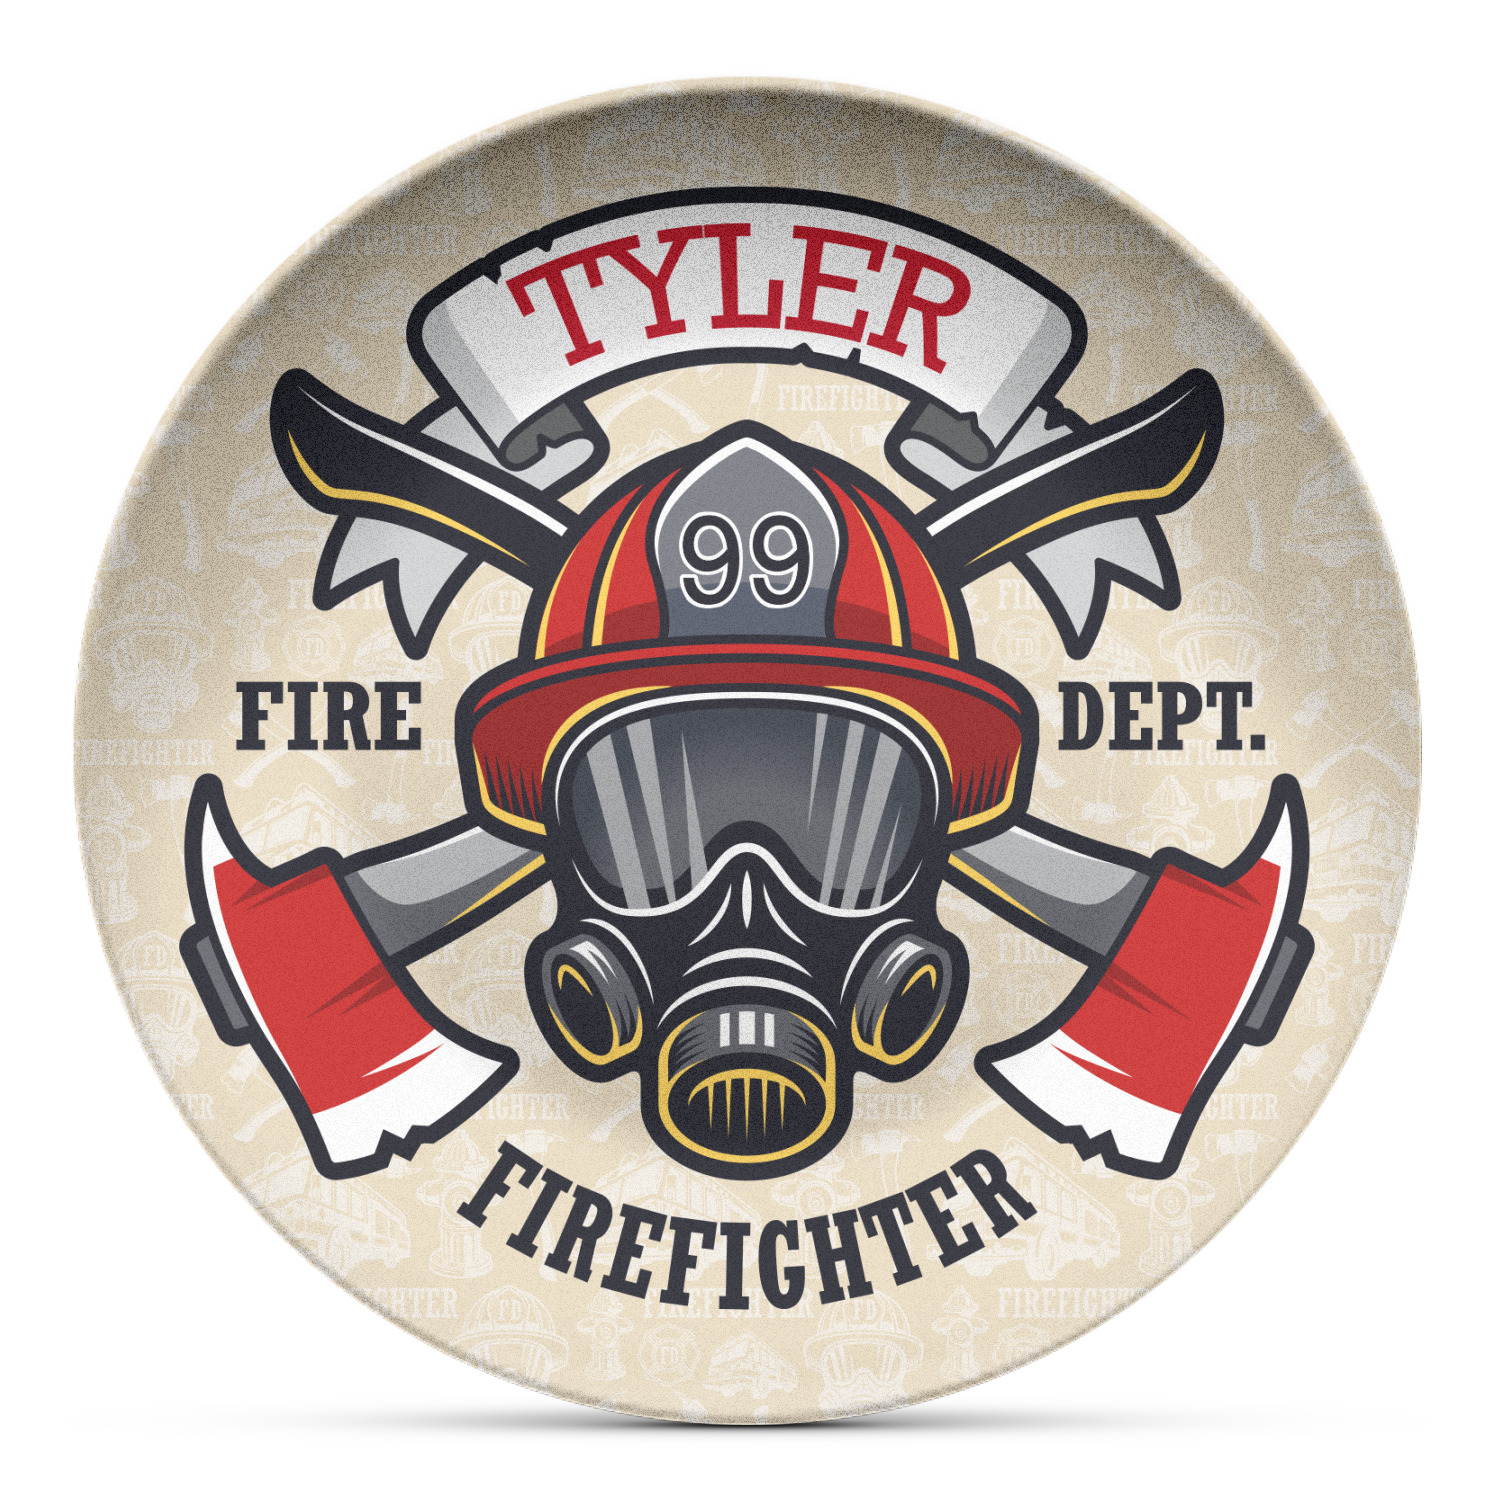 Firefighter Microwave Safe Plastic Plate - Composite Polymer